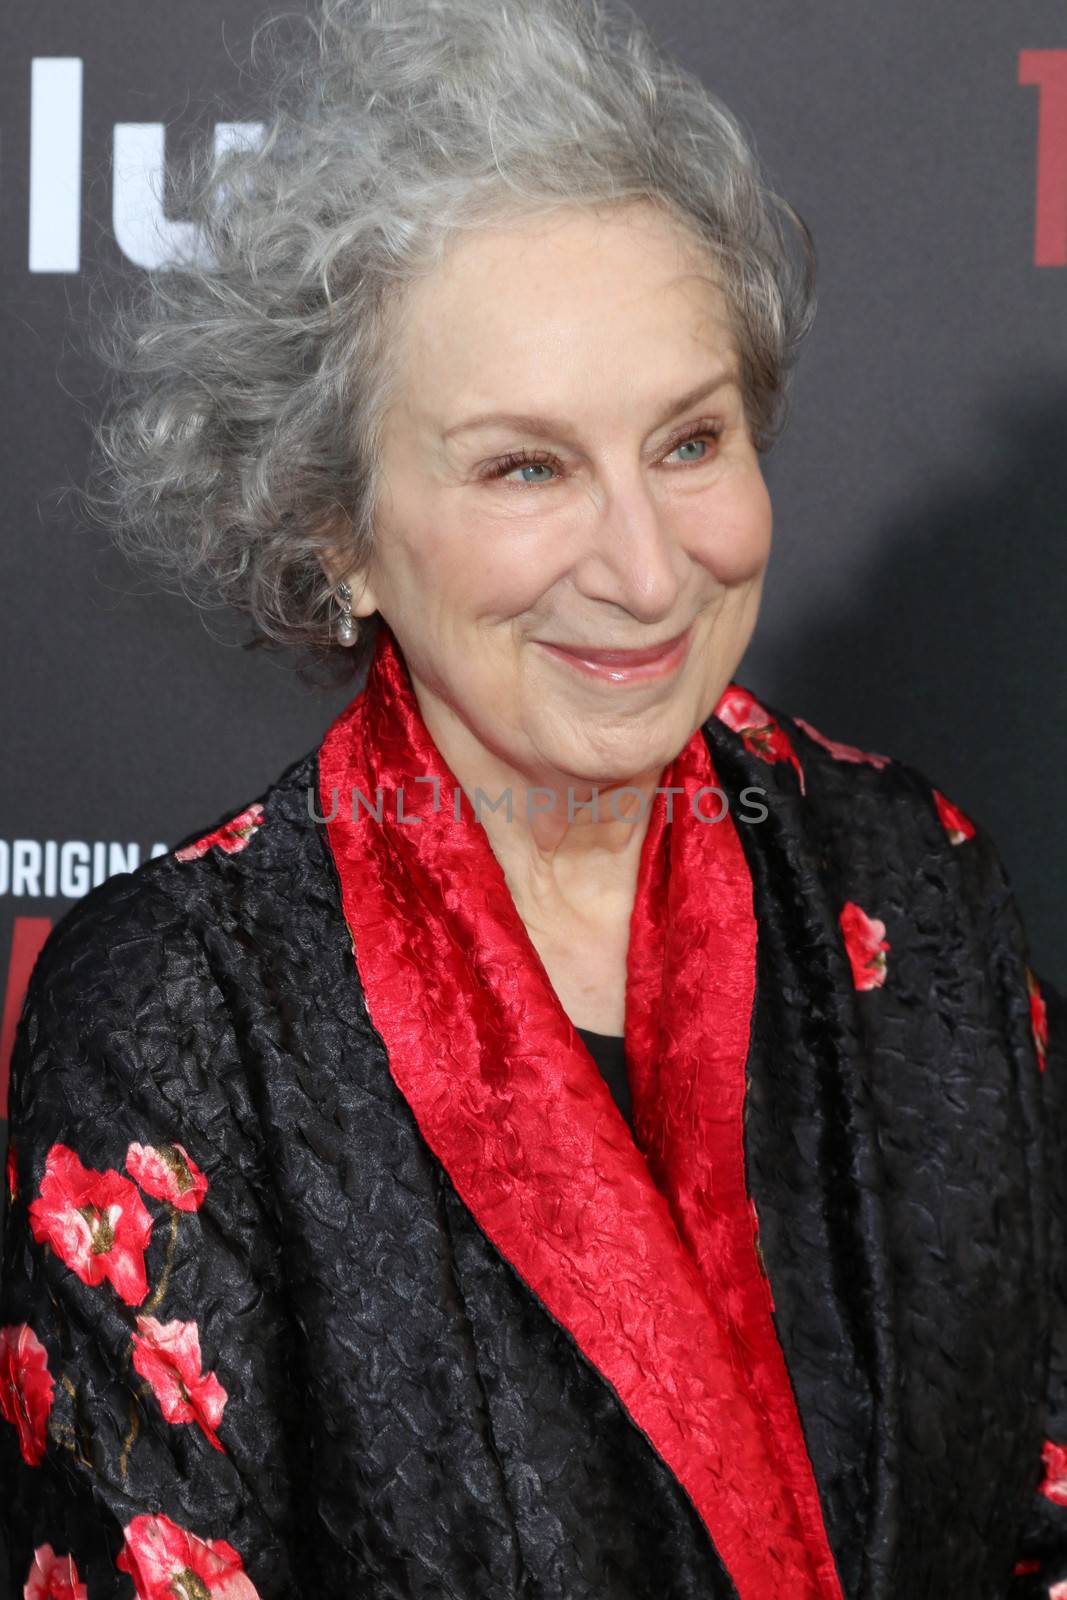 Margaret Atwood
at the Premiere Of Hulu's "The Handmaid's Tale," Cinerama Dome, Hollywood, CA 04-25-17/ImageCollect by ImageCollect